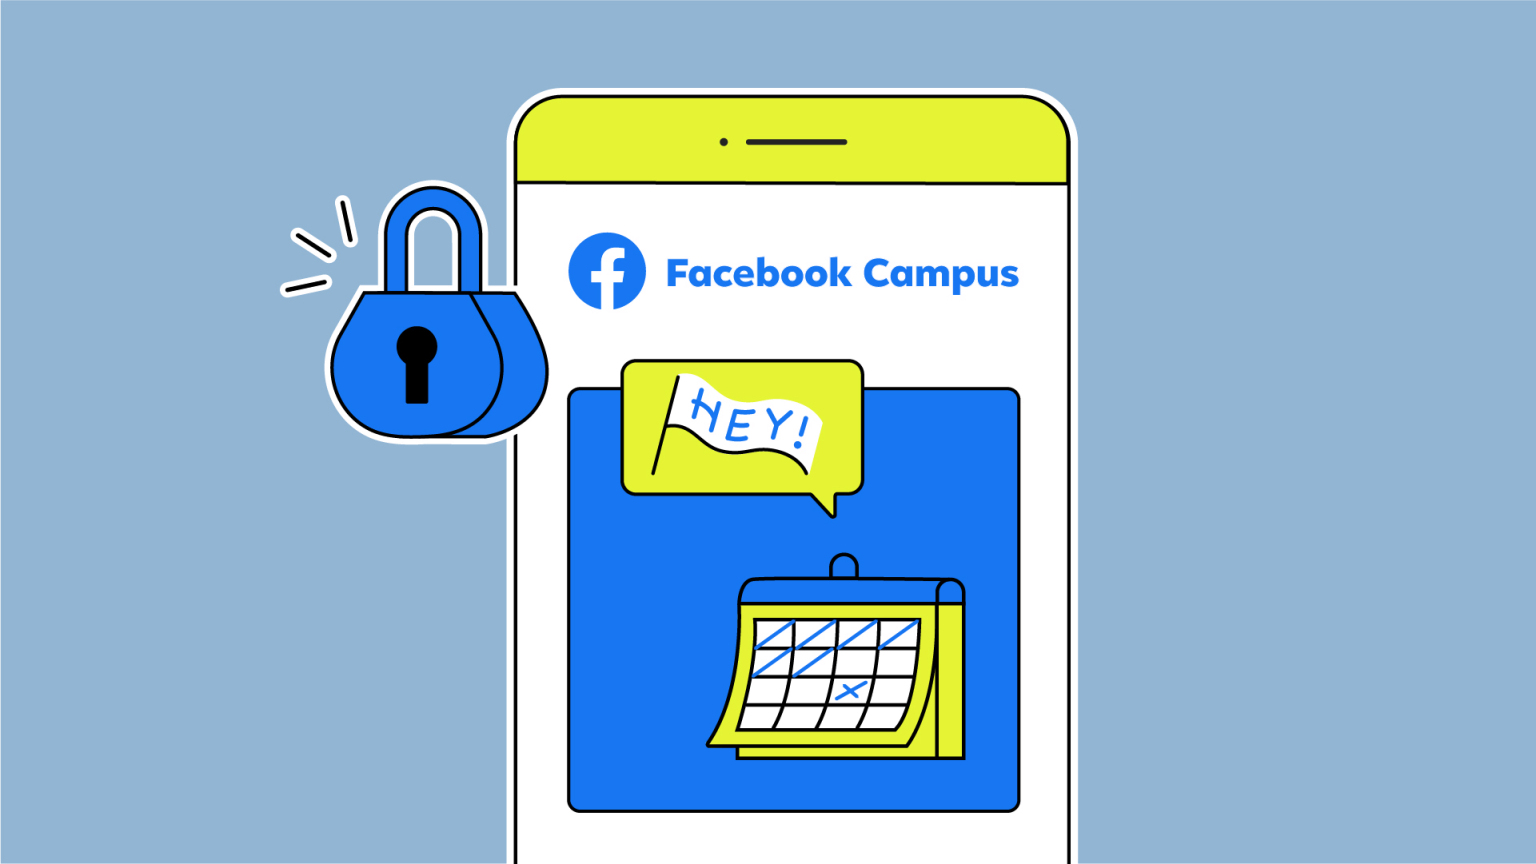 Facebook Campus introduced to connect students sharing similar interests